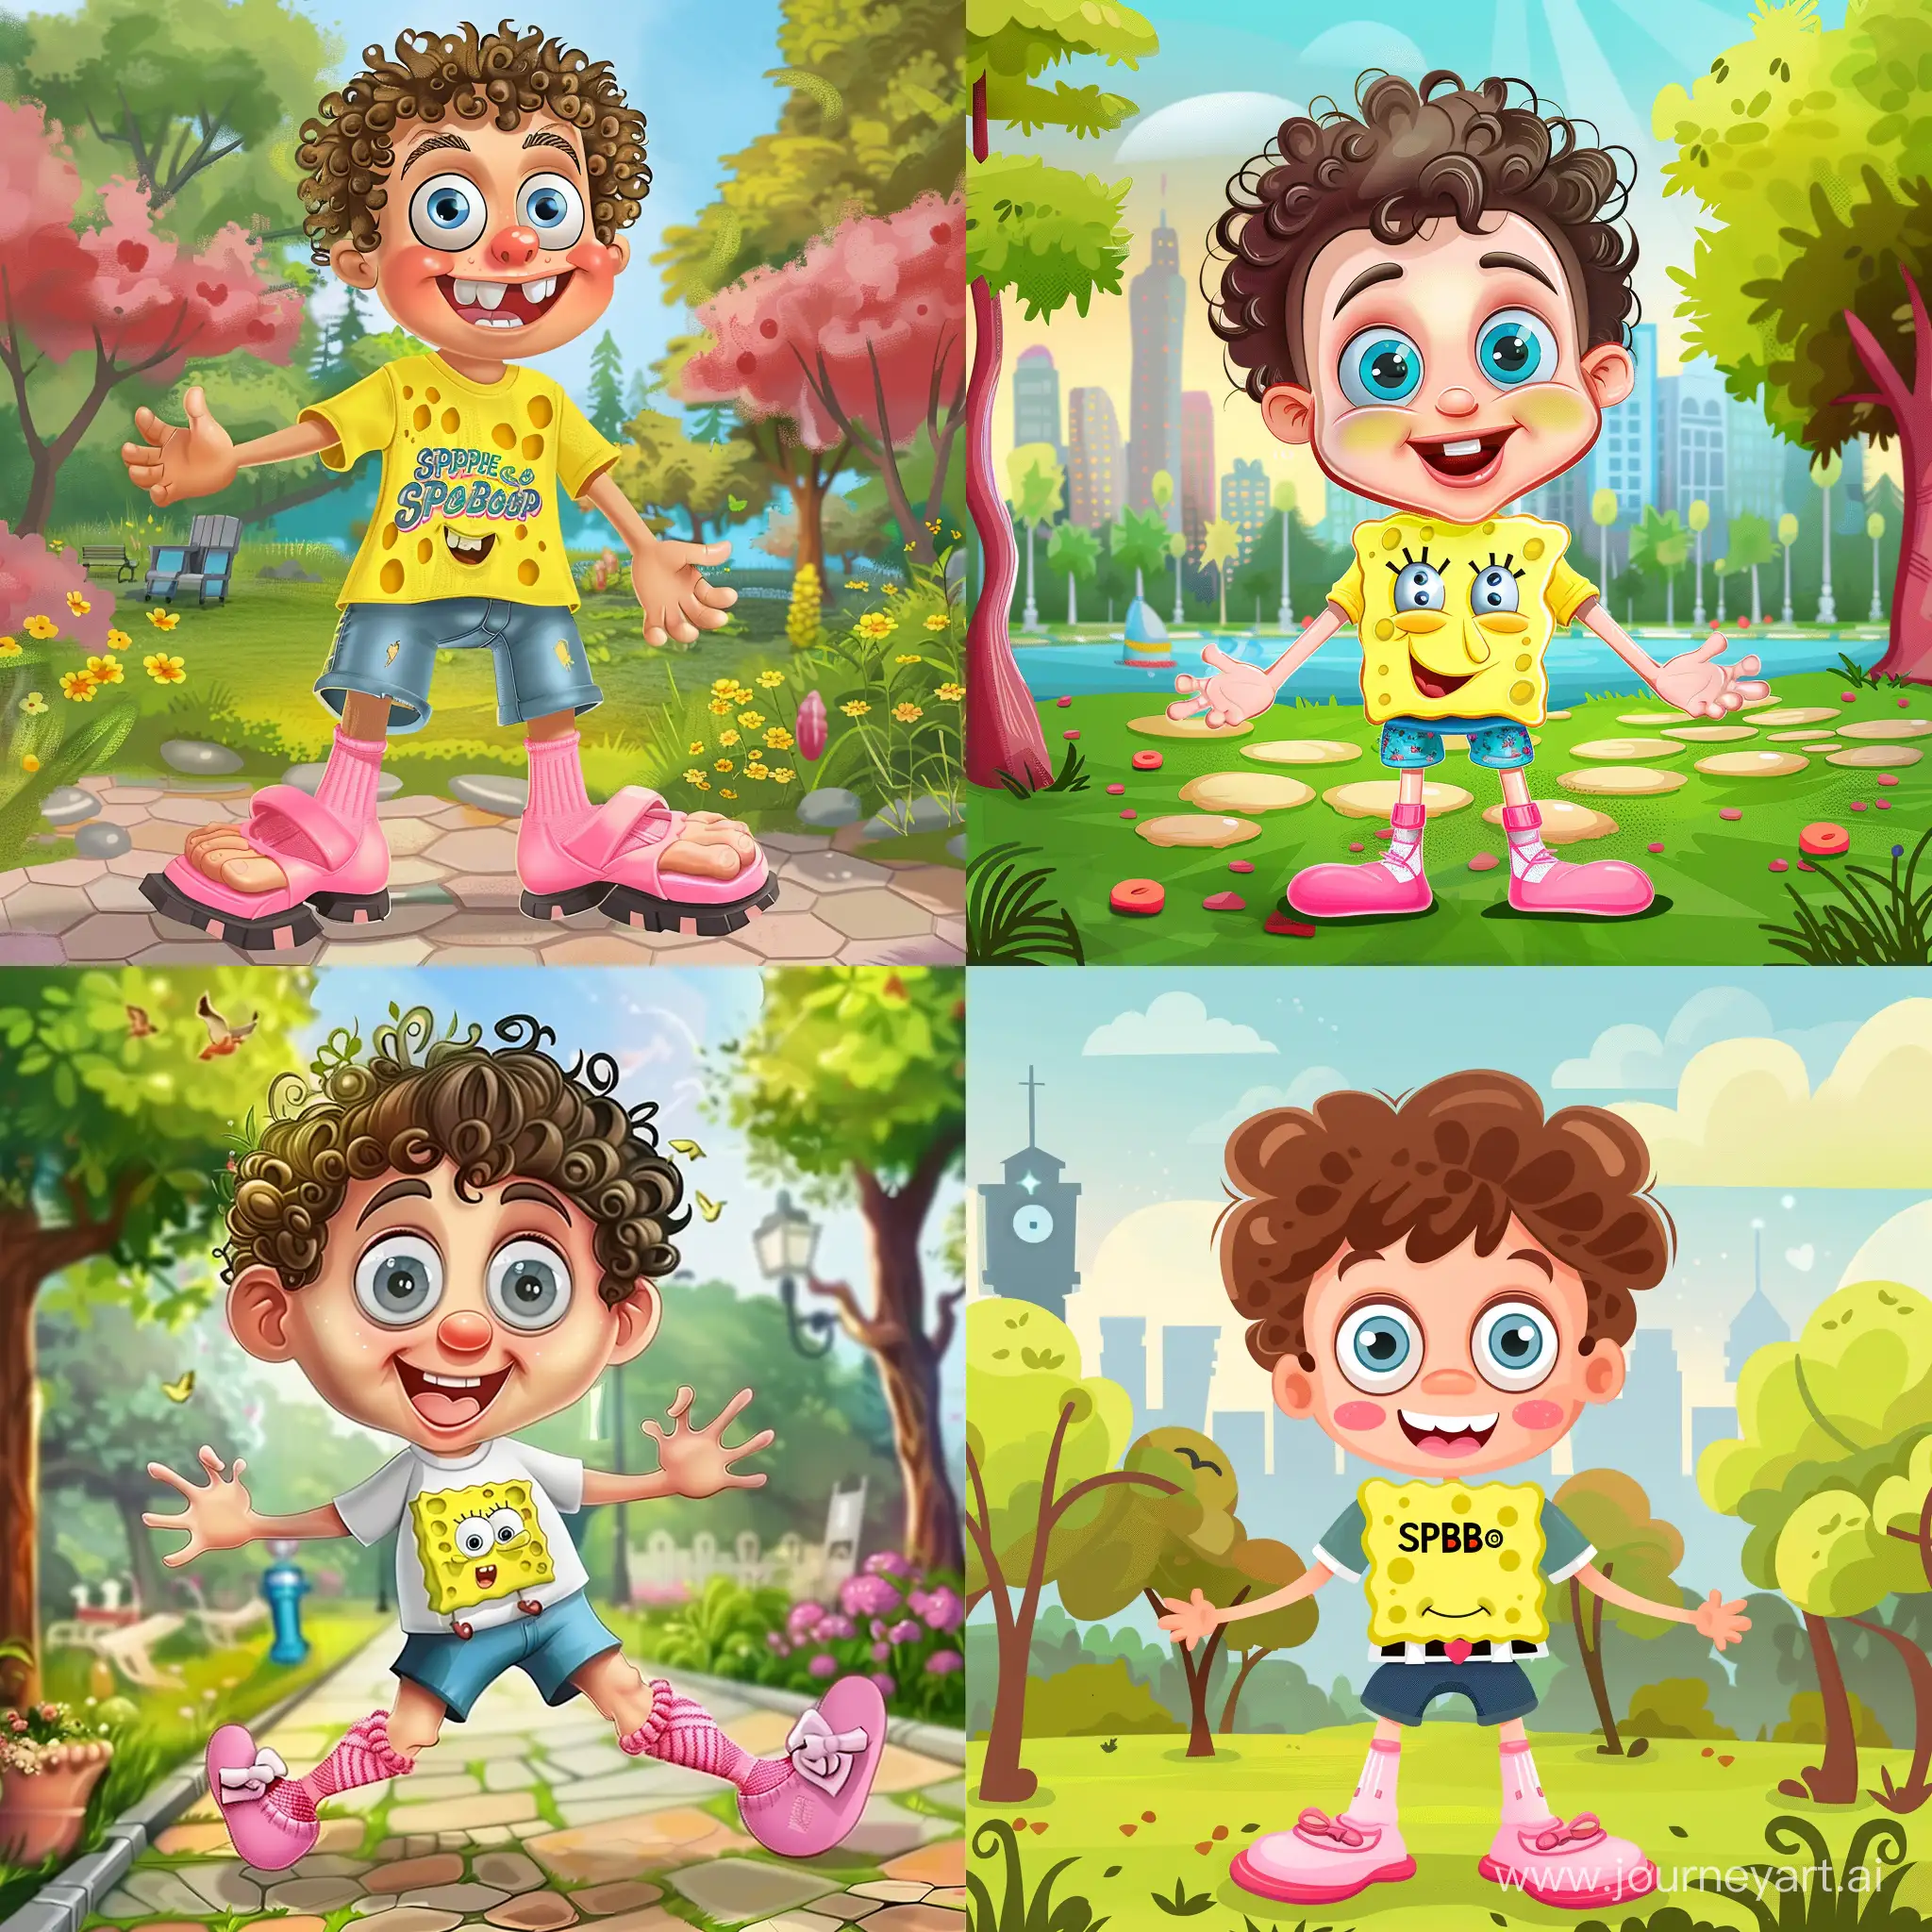 A cartoon picture of a funny boy in a spongebob t-shirt and pink slippers and socks in the park.